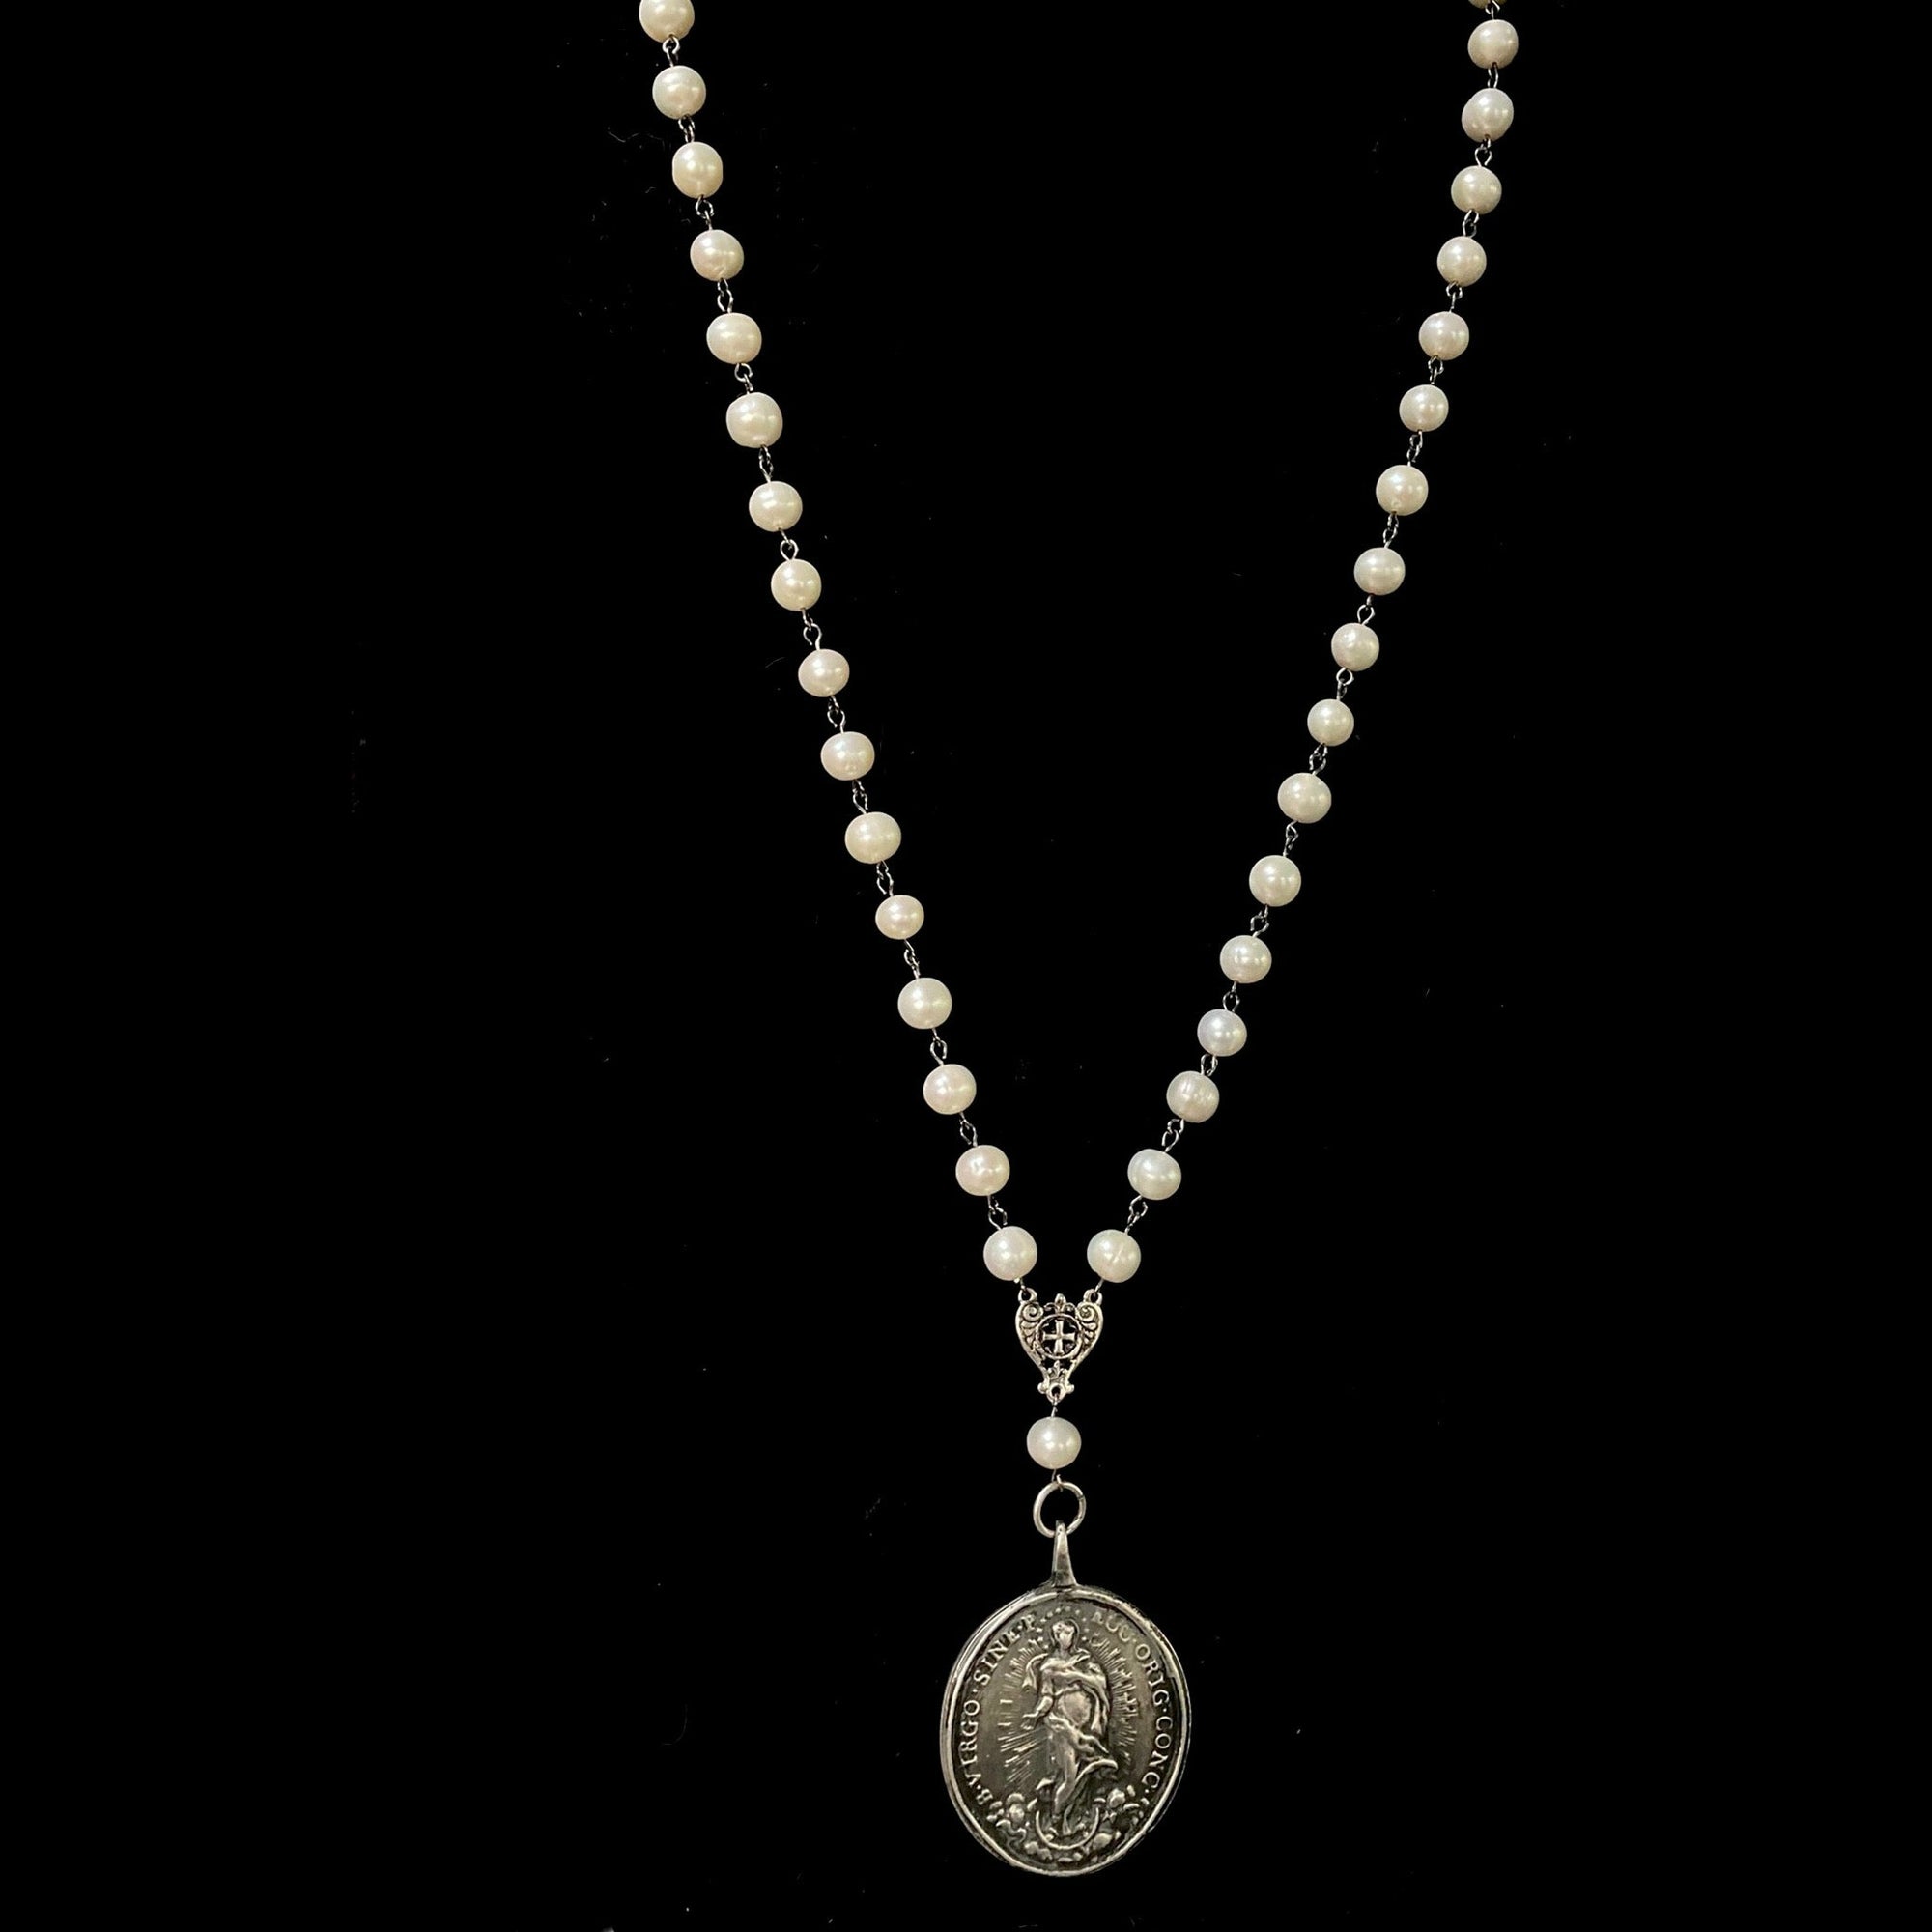 Virgo Rising Fresh Water Pearl Necklace in Sterling Silver